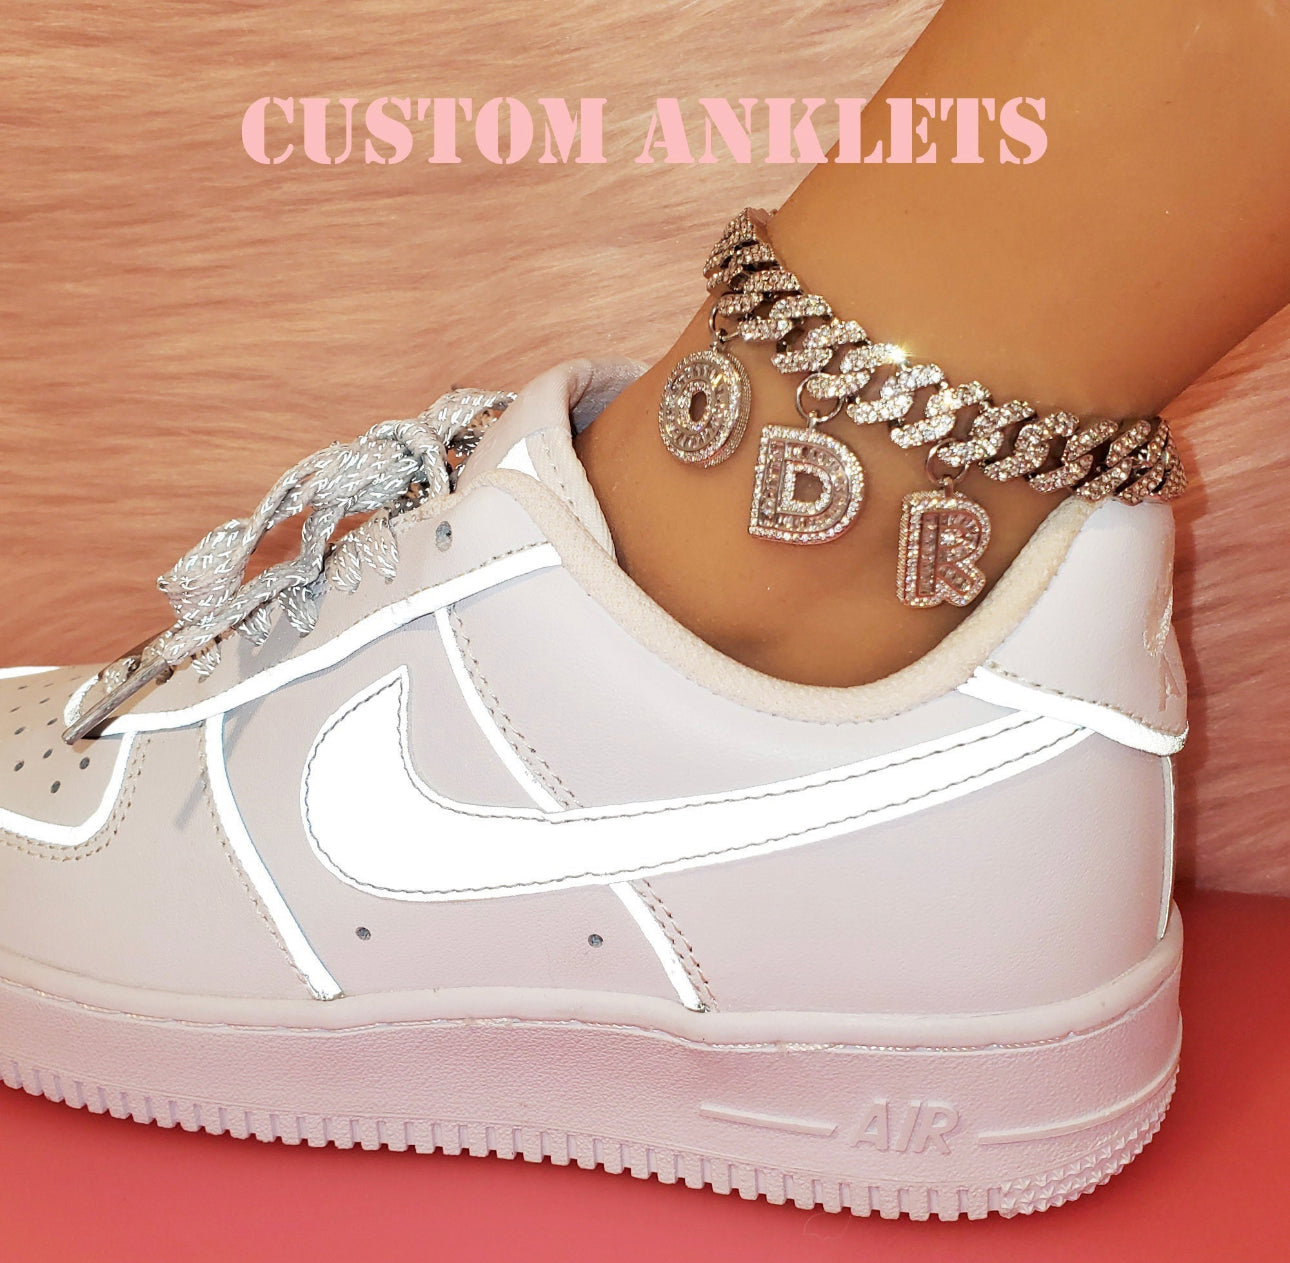 STYLE ICON CUSTOM ANKLET